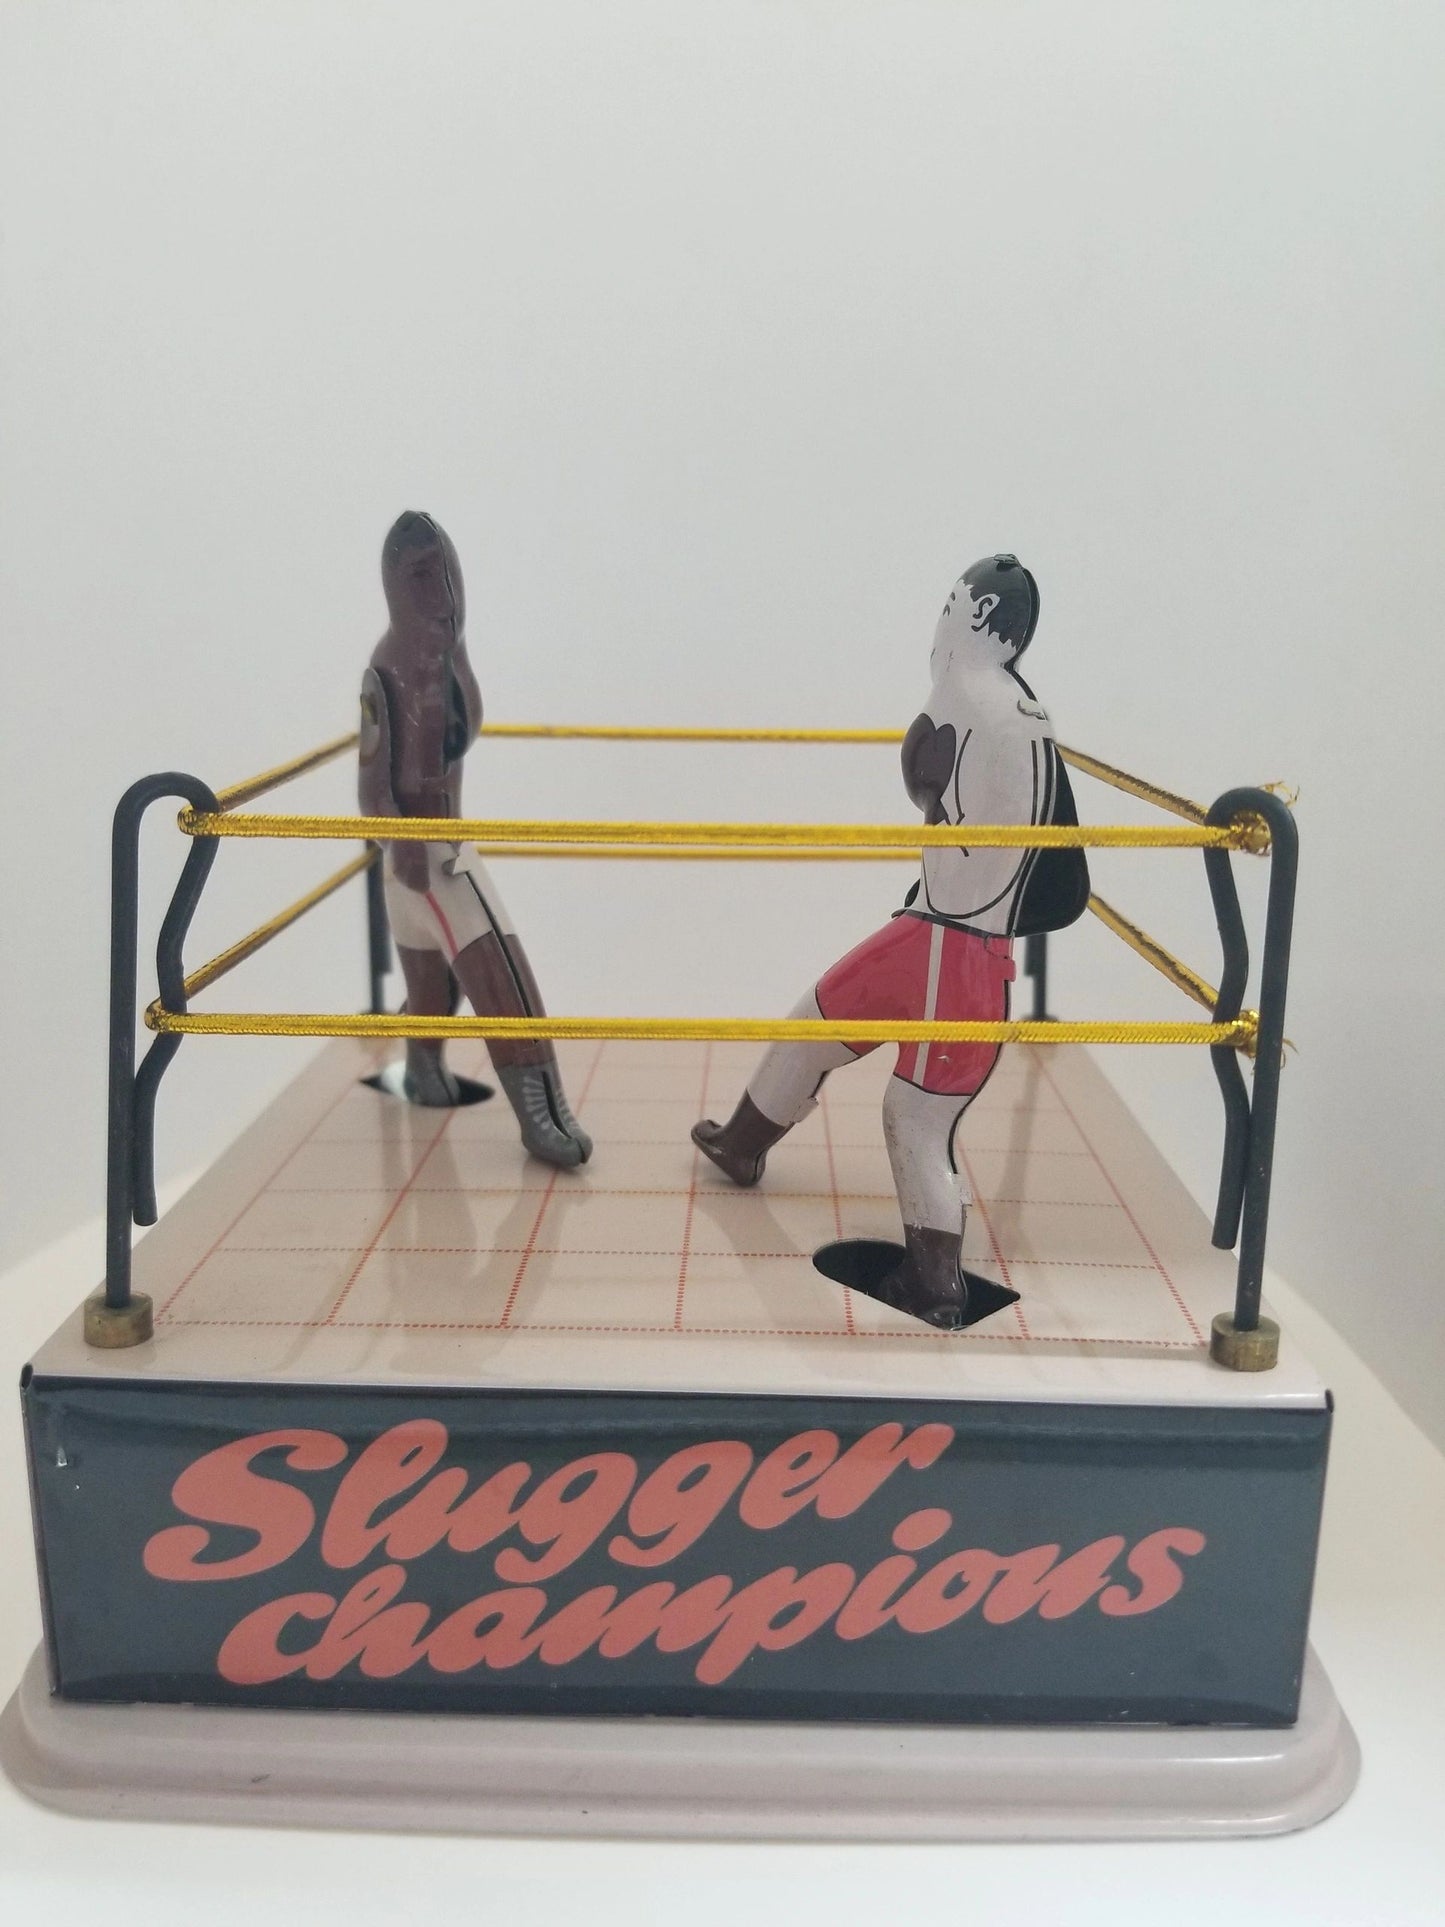 Tin "Slugger Champions" Wind-up Boxers Collator's Toy